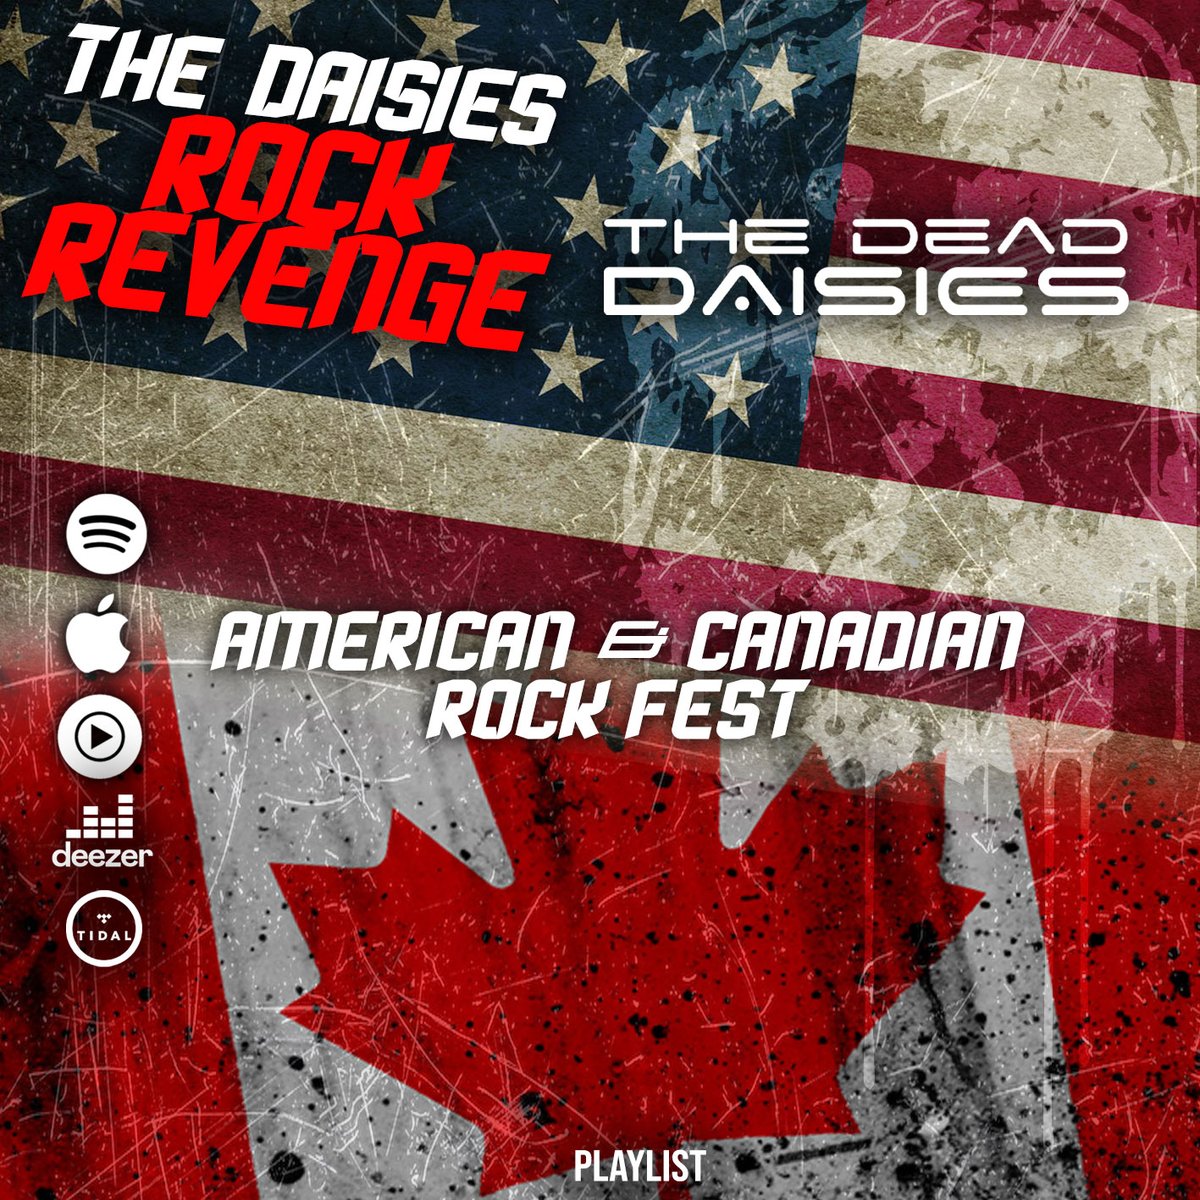 Thought we’d pull together a playlist to celebrate our upcoming US & Canadian Tour, with some of the great bands from both places!🤘🤘
Stream away & have a cracker of a weekend everyone!🚀🚀

thedeaddaisies.com/daisies-rock-r…

#TheDeadDaisies #TheDaisiesRockRevenge